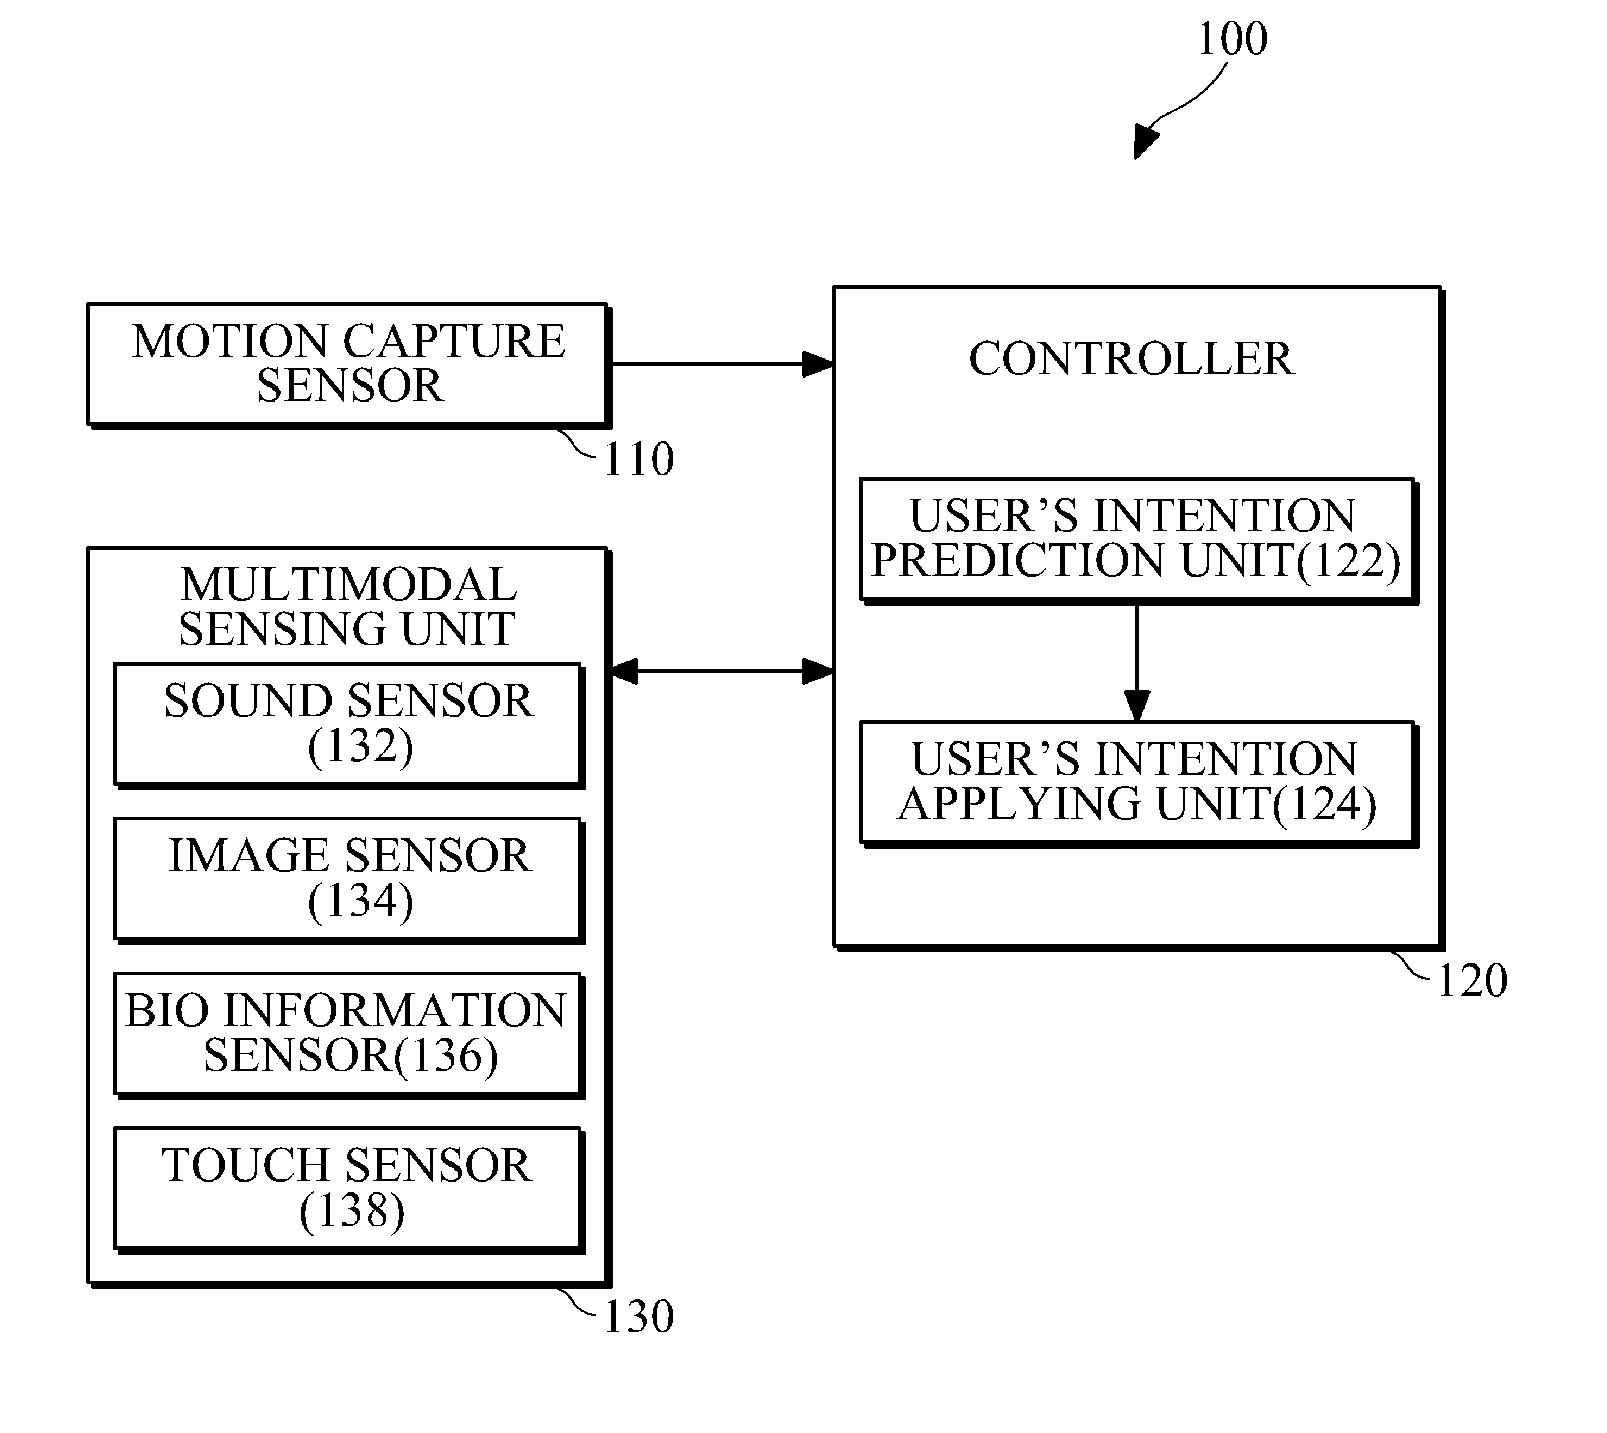 Apparatus and method for predicting user's intention based on multimodal information